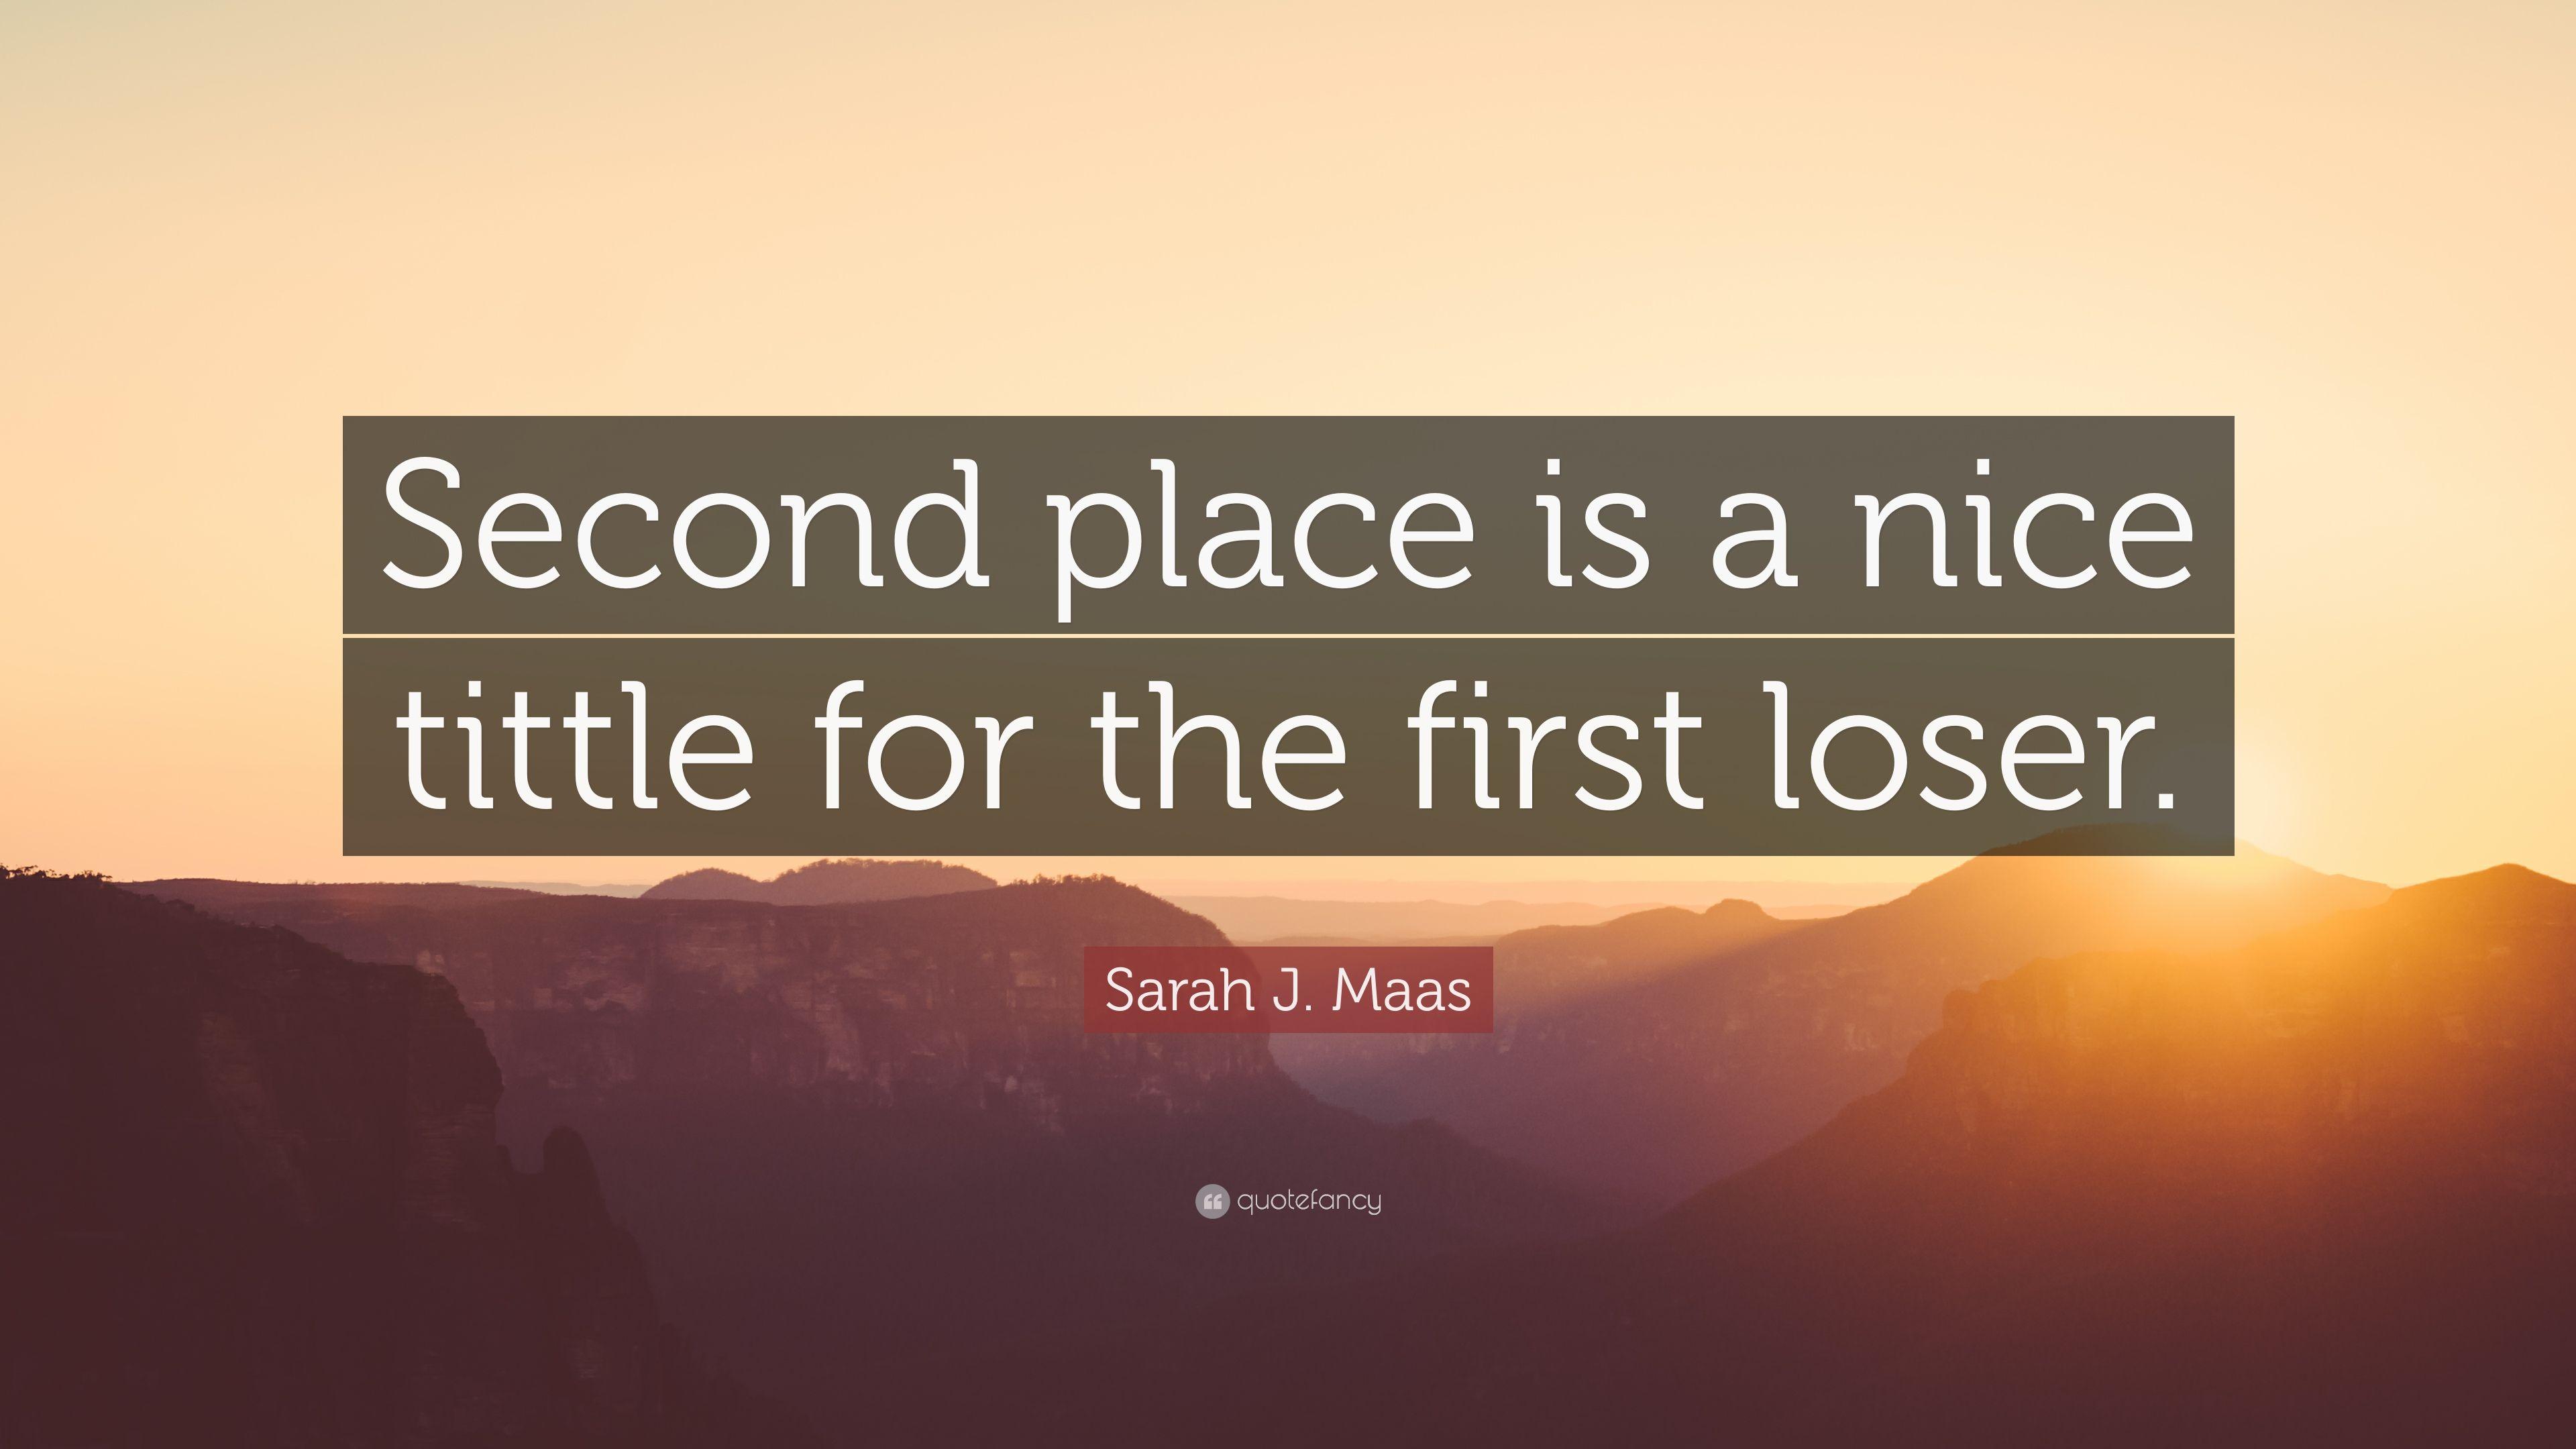 Sarah J. Maas Quote: “Second place is a nice tittle for the first